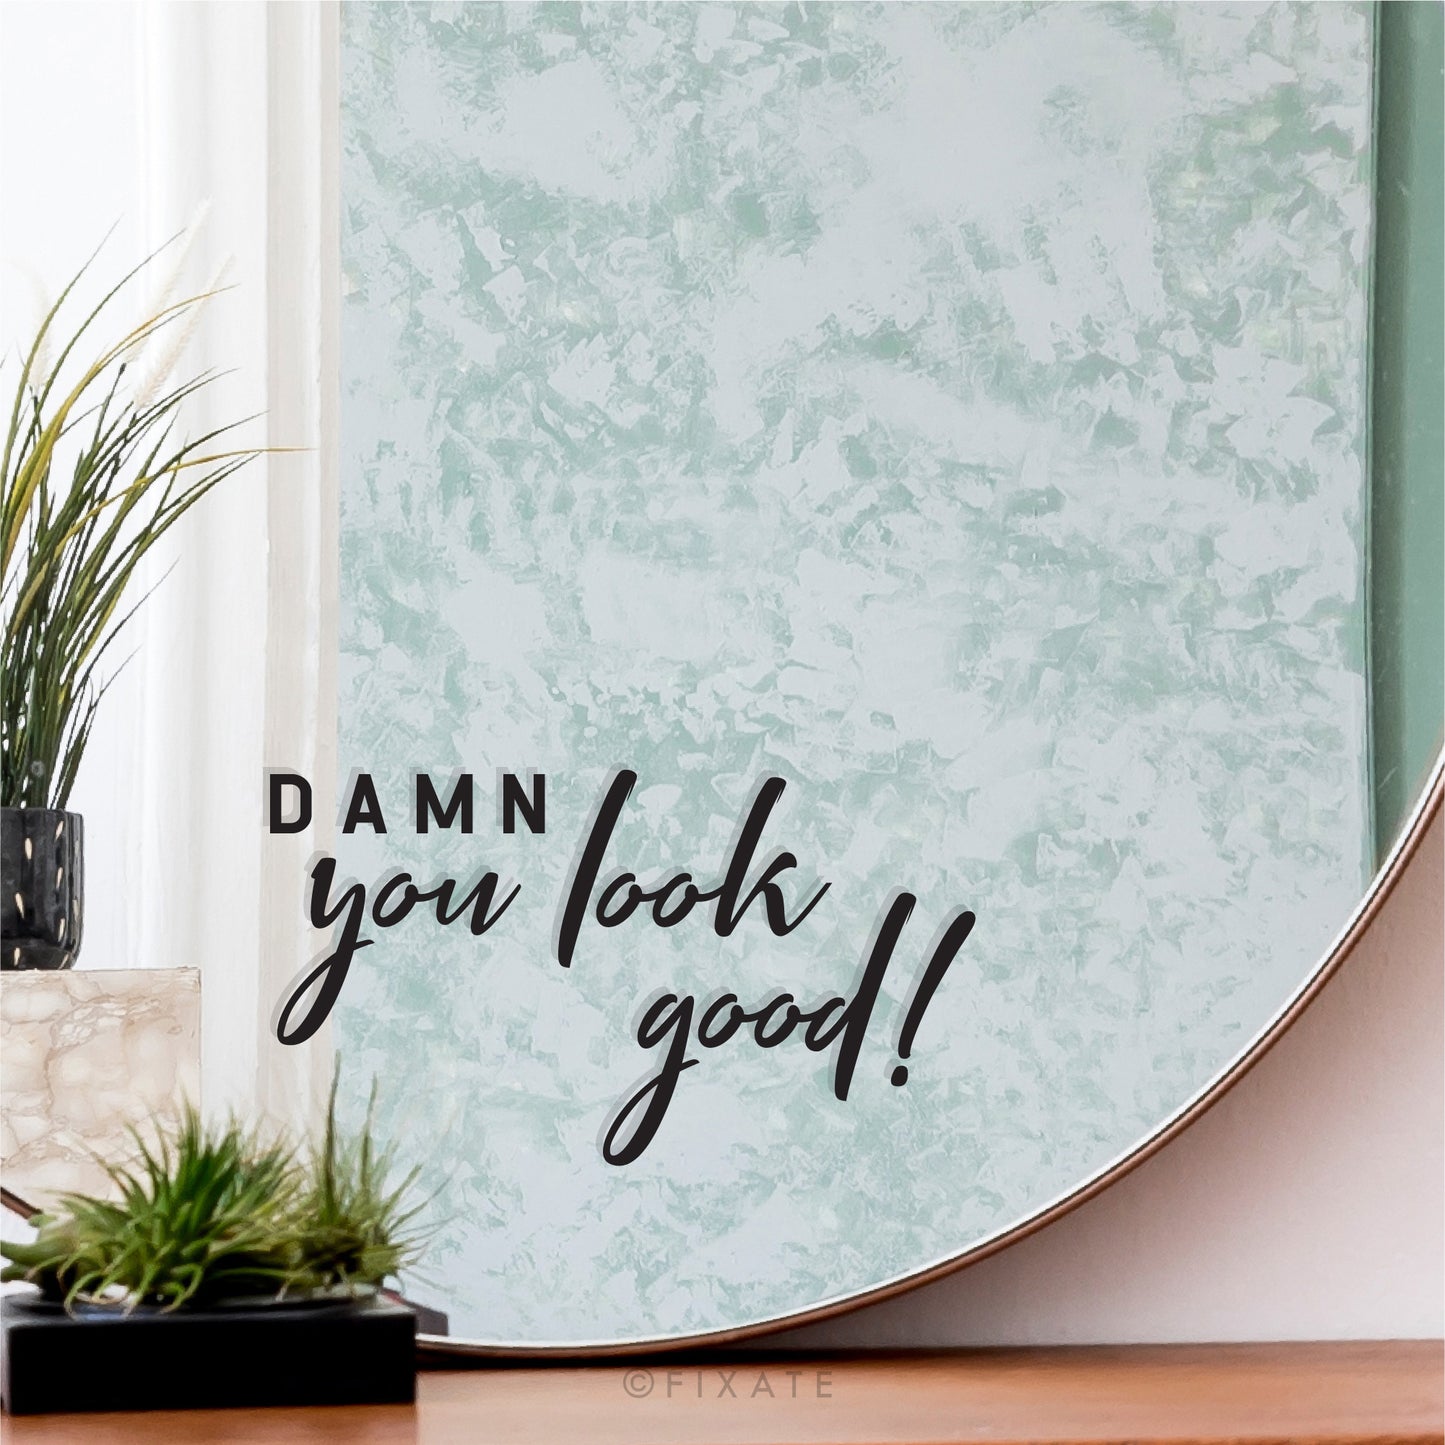 Self Love Affirmation Decal Damn You Look Good Motivational Mirror Sticker Quote Gift For Her Vinyl Transfer Daily Reminder